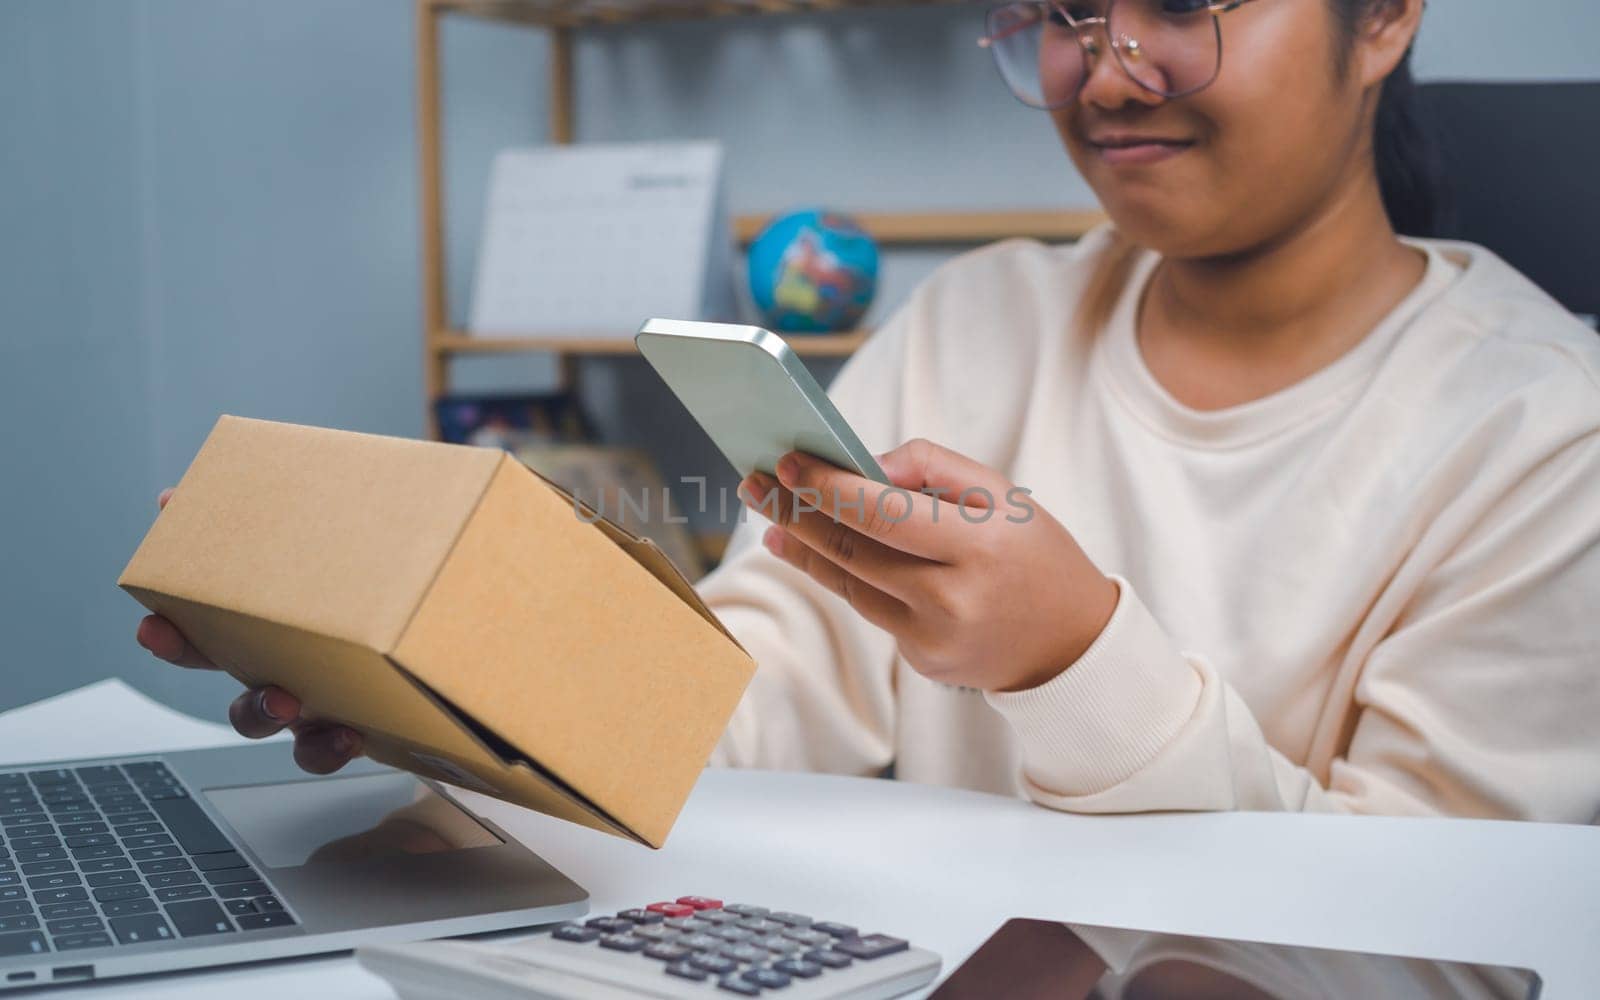 Woman runs an e-commerce business is checking orders from laptop, she owns an online store, she packs and ships through a private transport company. Online selling and online shopping concepts.